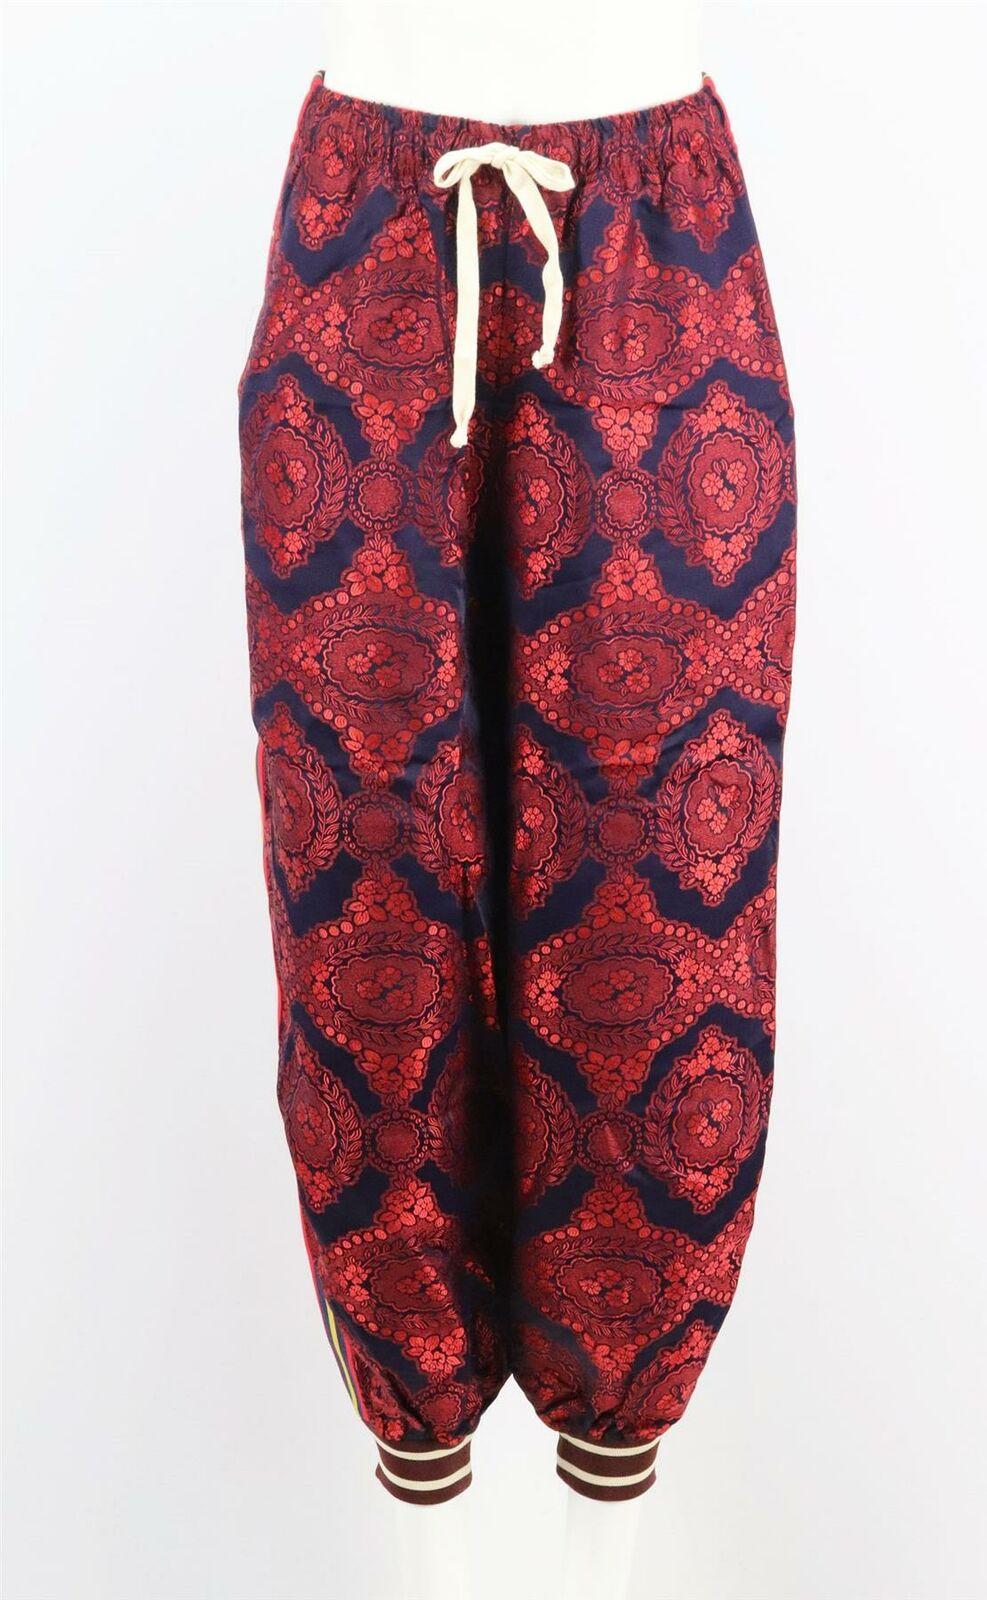 These Gucci pants have been made in Italy from panels of floral jacquard and lustrous silk-twill and are fitted with an elasticated waistband and ribbed cuffs to accentuate the voluminous legs.
Multicolored jacquard and silk-twill.
Pull on.
77%